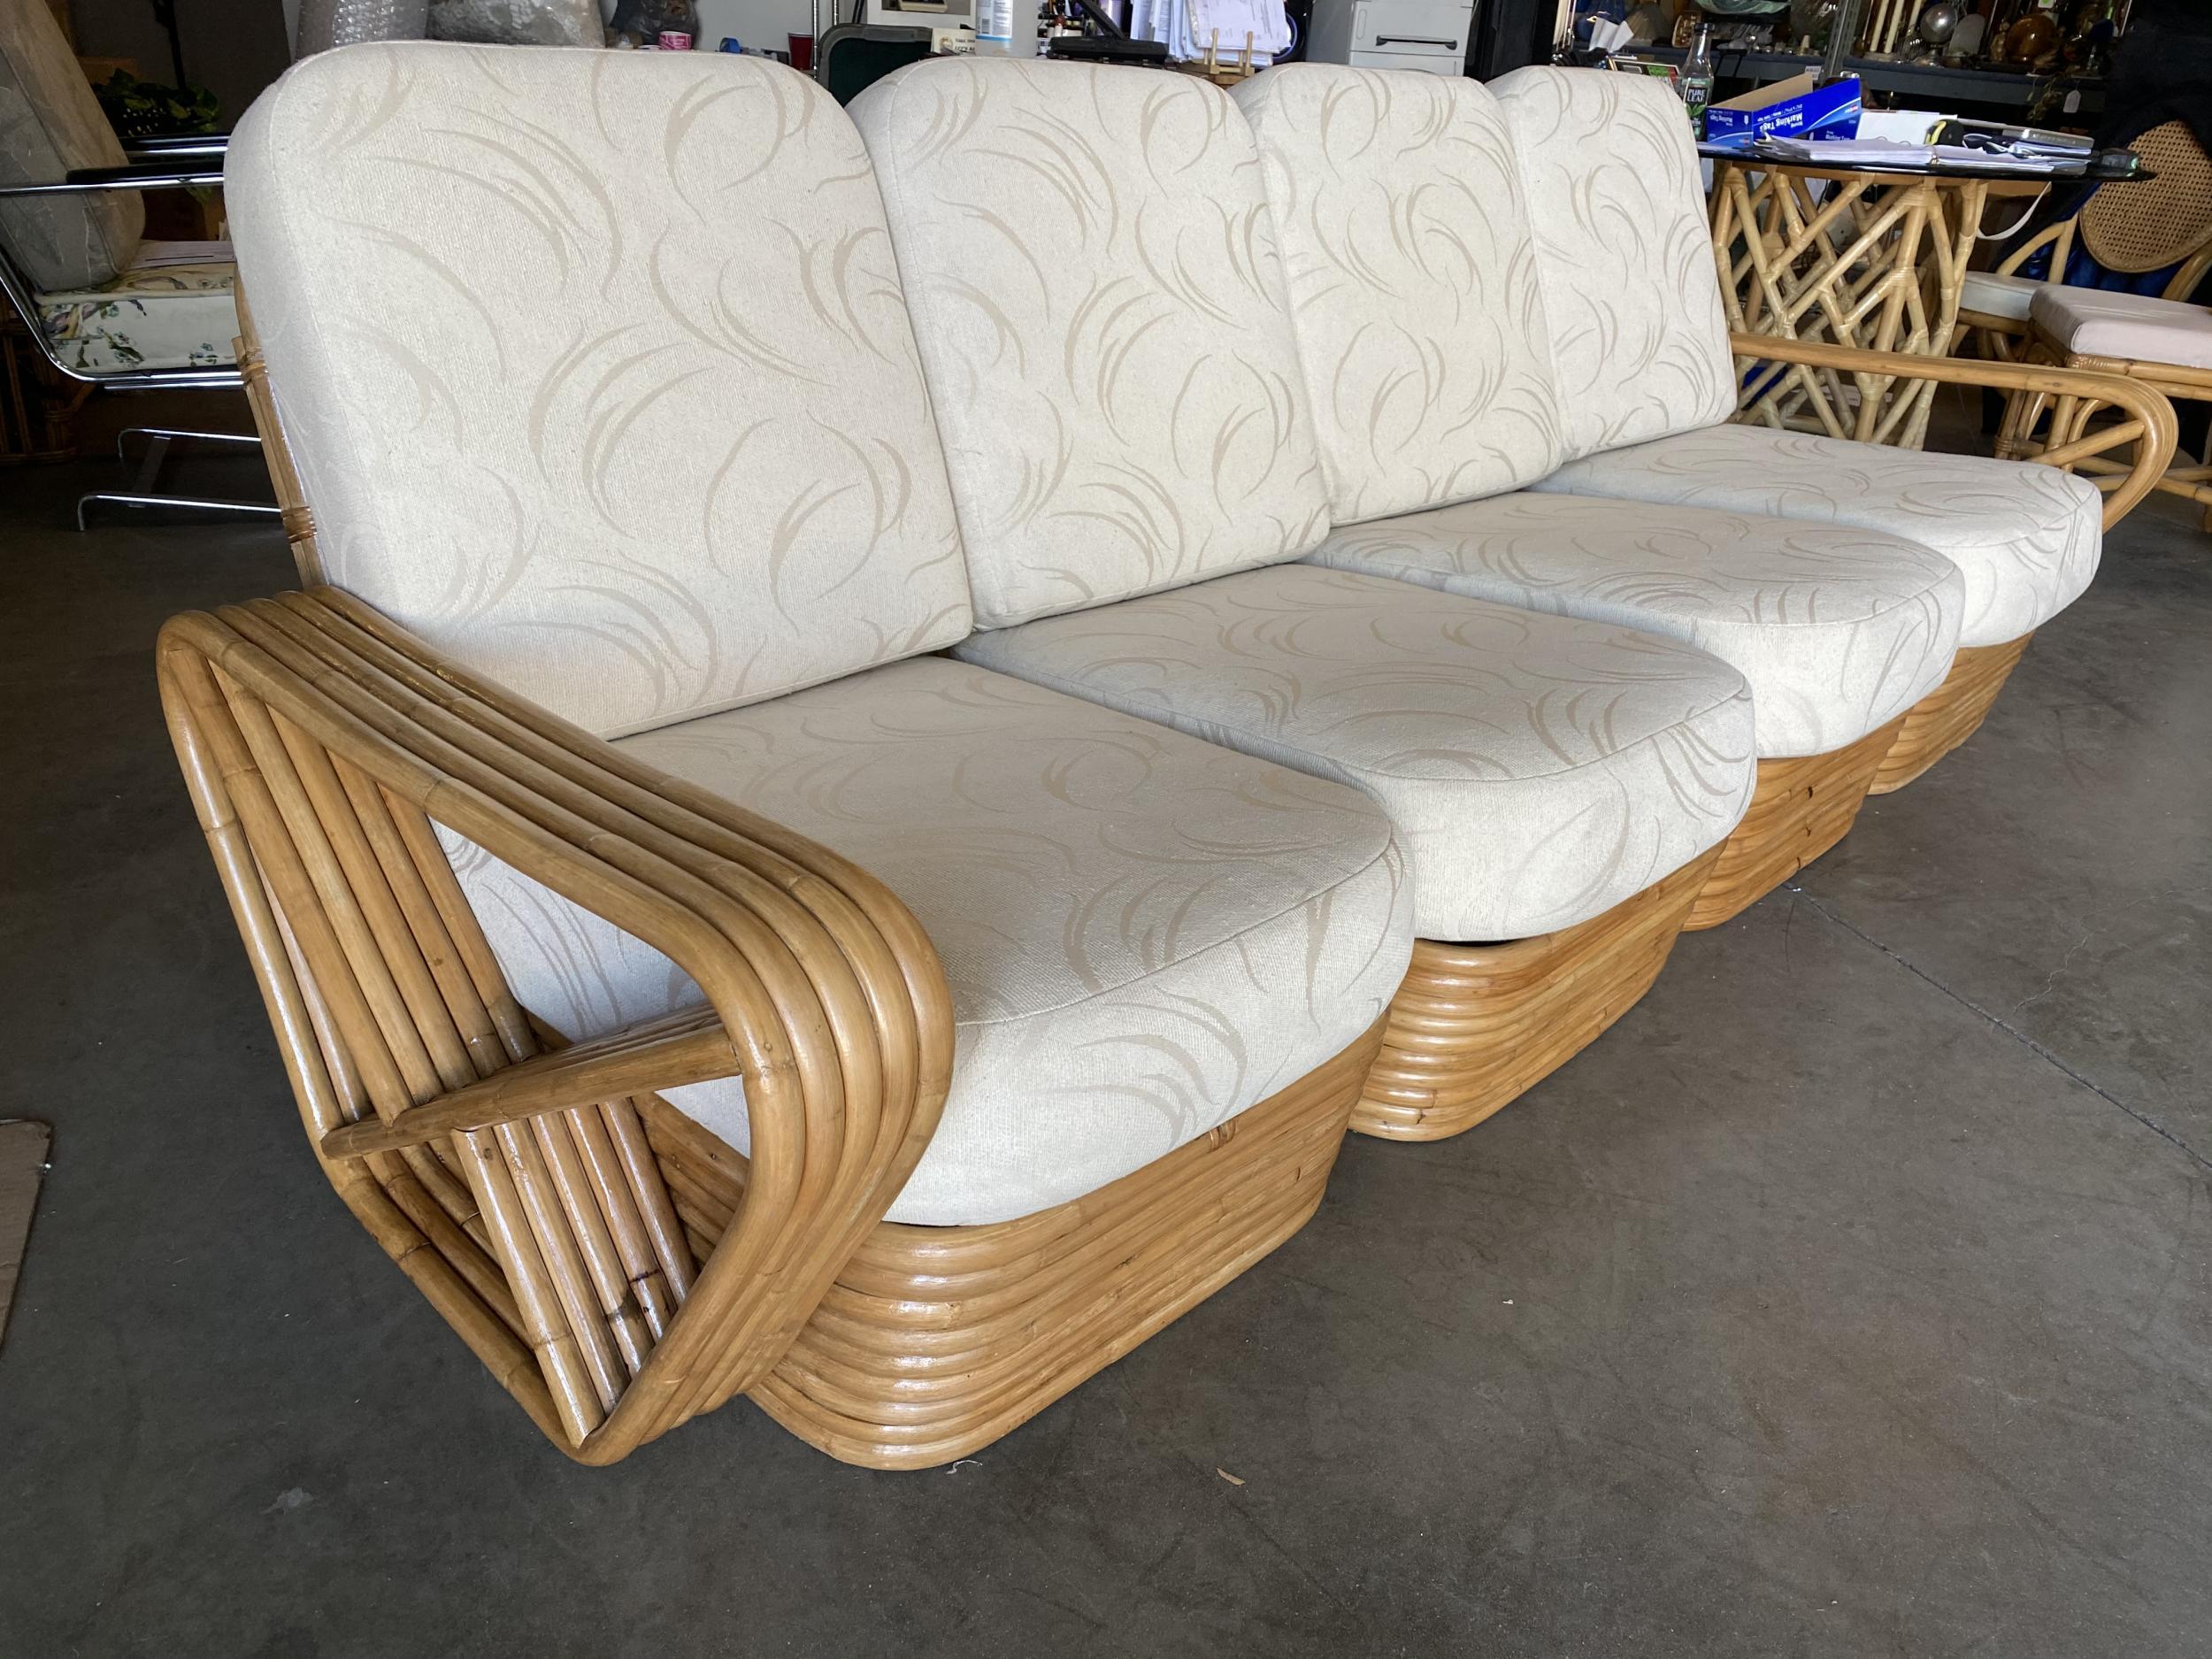 Paul Frankl style rattan living-room set including a matching four-seat sectional sofa and lounge chair. Both feature the famous six-strand square pretzel side arms and stacked rattan base originally designed by Paul Frankl.

Measures: 
Sofa 34